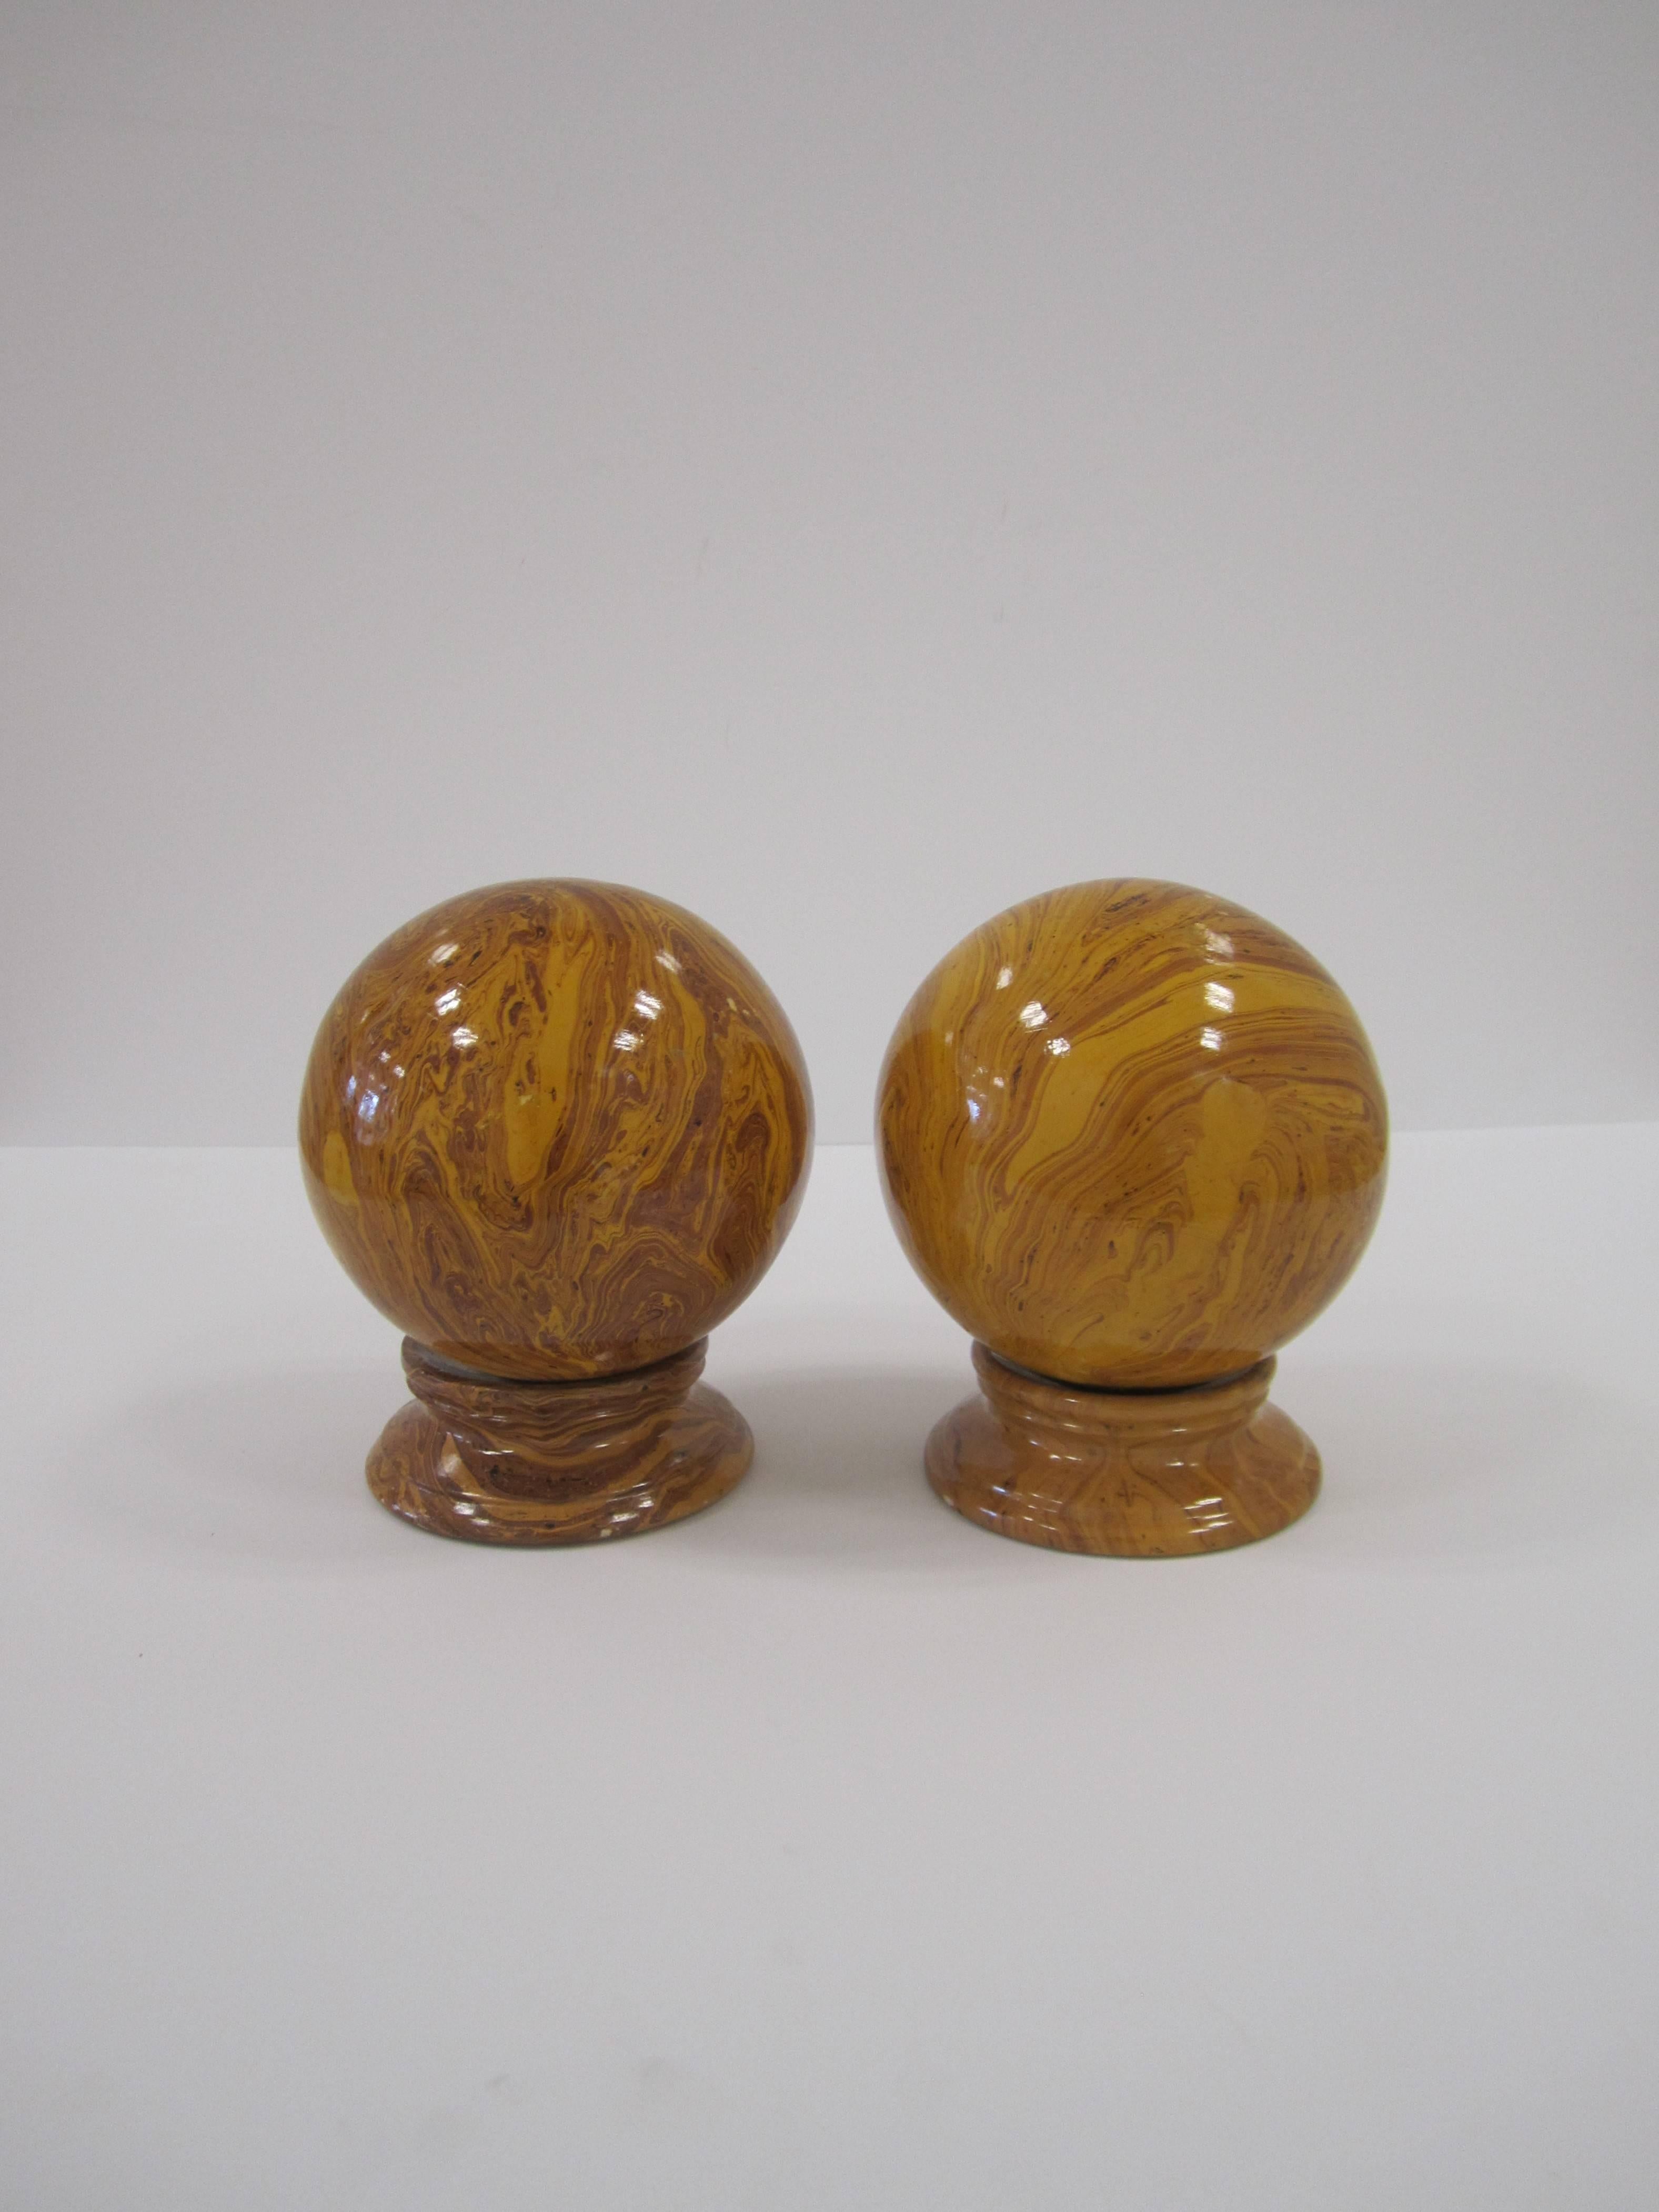 A pair of Italian ceramic marbleized glazed decorative round globe ball spheres garnitures on pedestal bases, circa late-20th century, Italy. Well made with a beautiful marble pattern, covered with a light glaze. Colors include swirls of deep